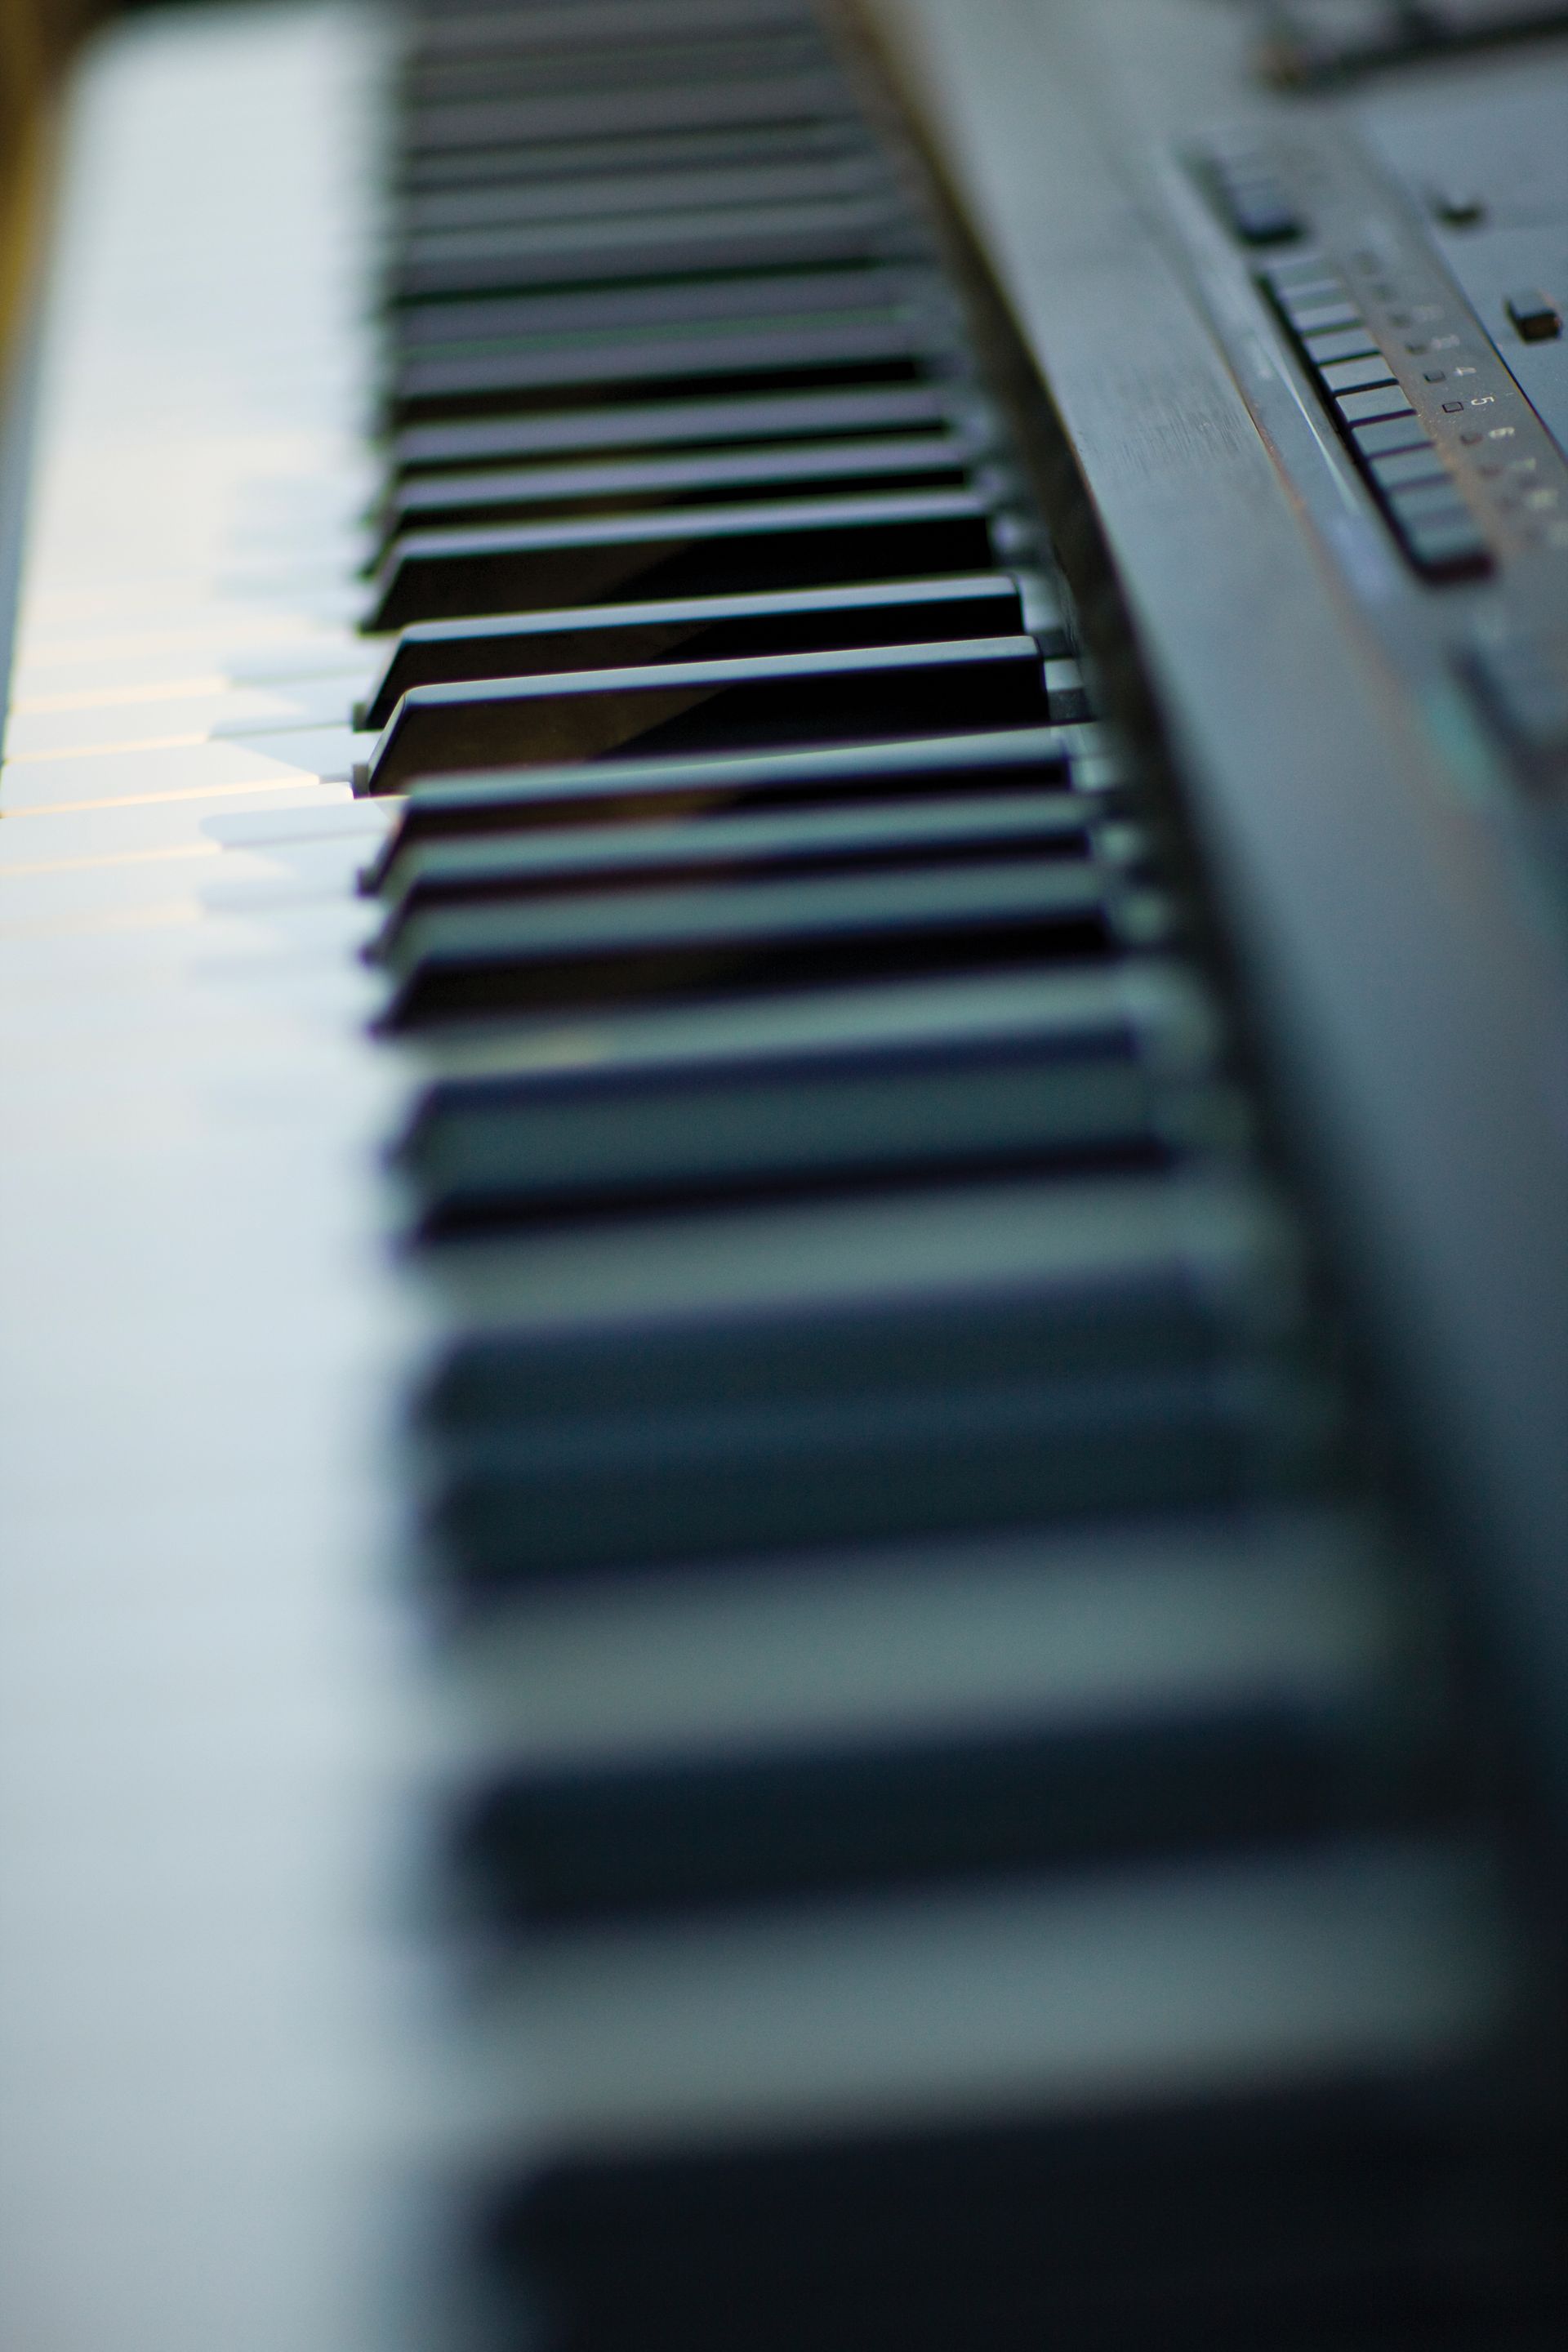 An image of an electronic keyboard.